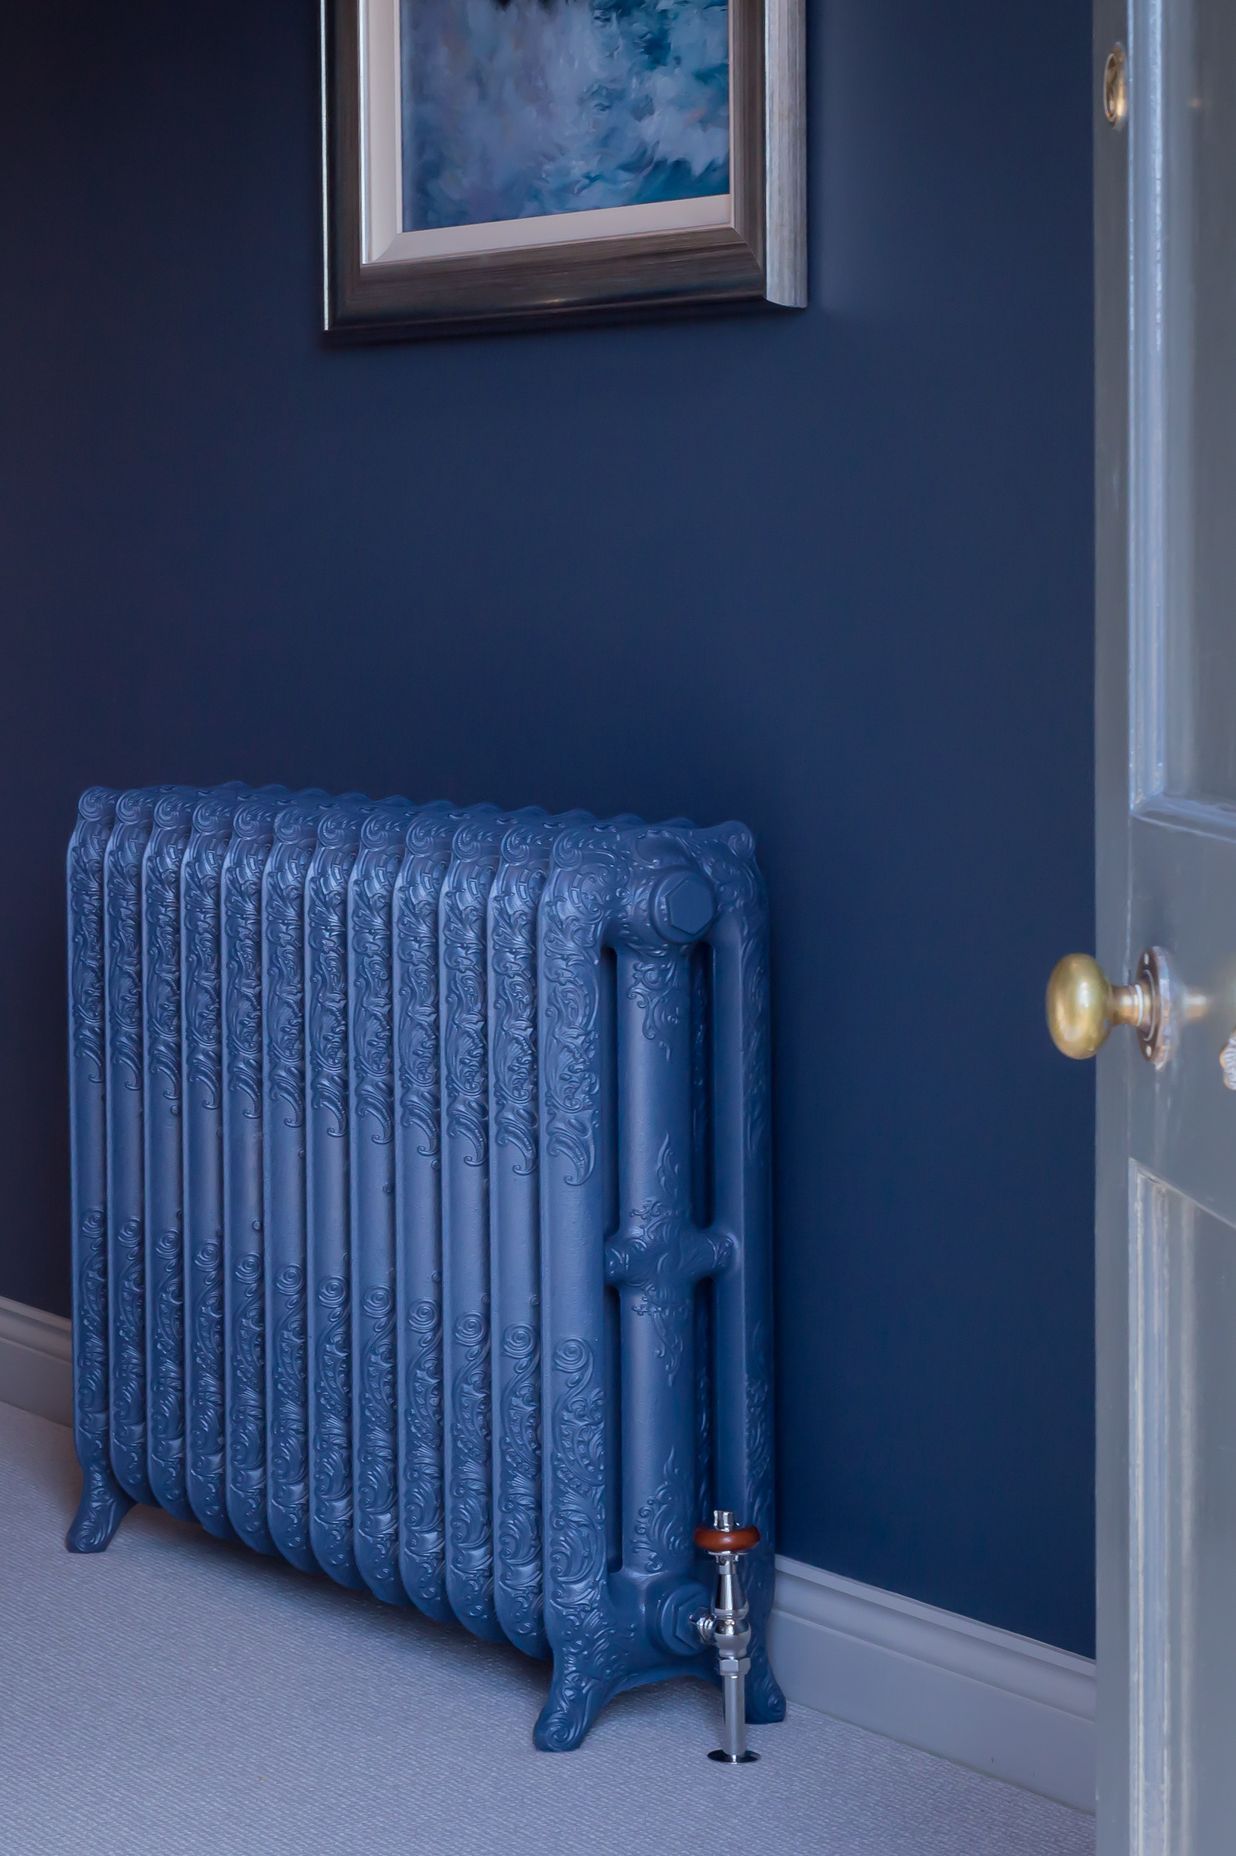 The Paladin heritage radiator is a character piece designed to impart a period feel in traditional homes.